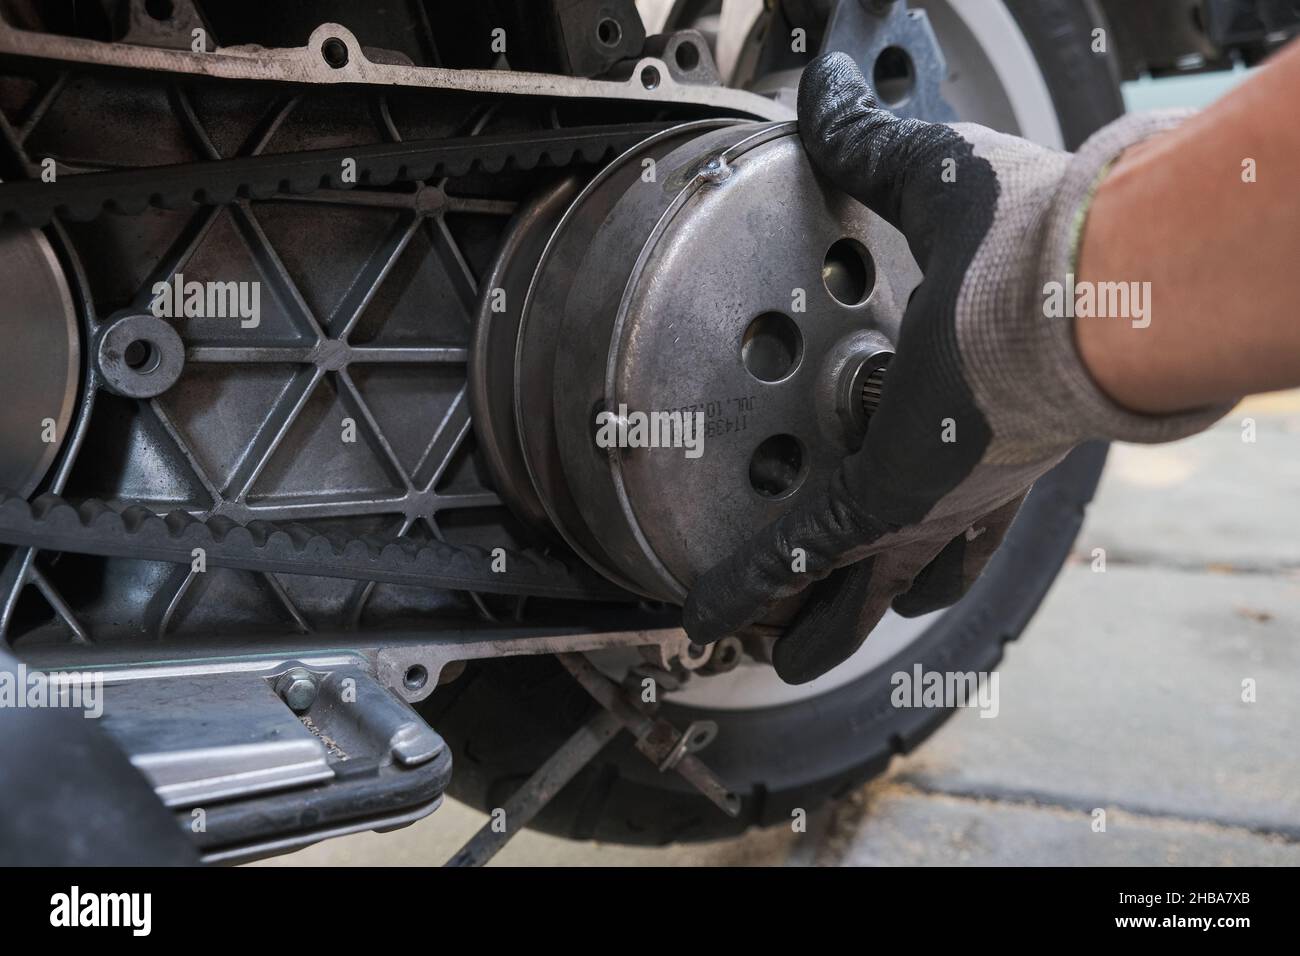 Scooter motorcycle and clutch hand of mechanic close up Stock Photo -